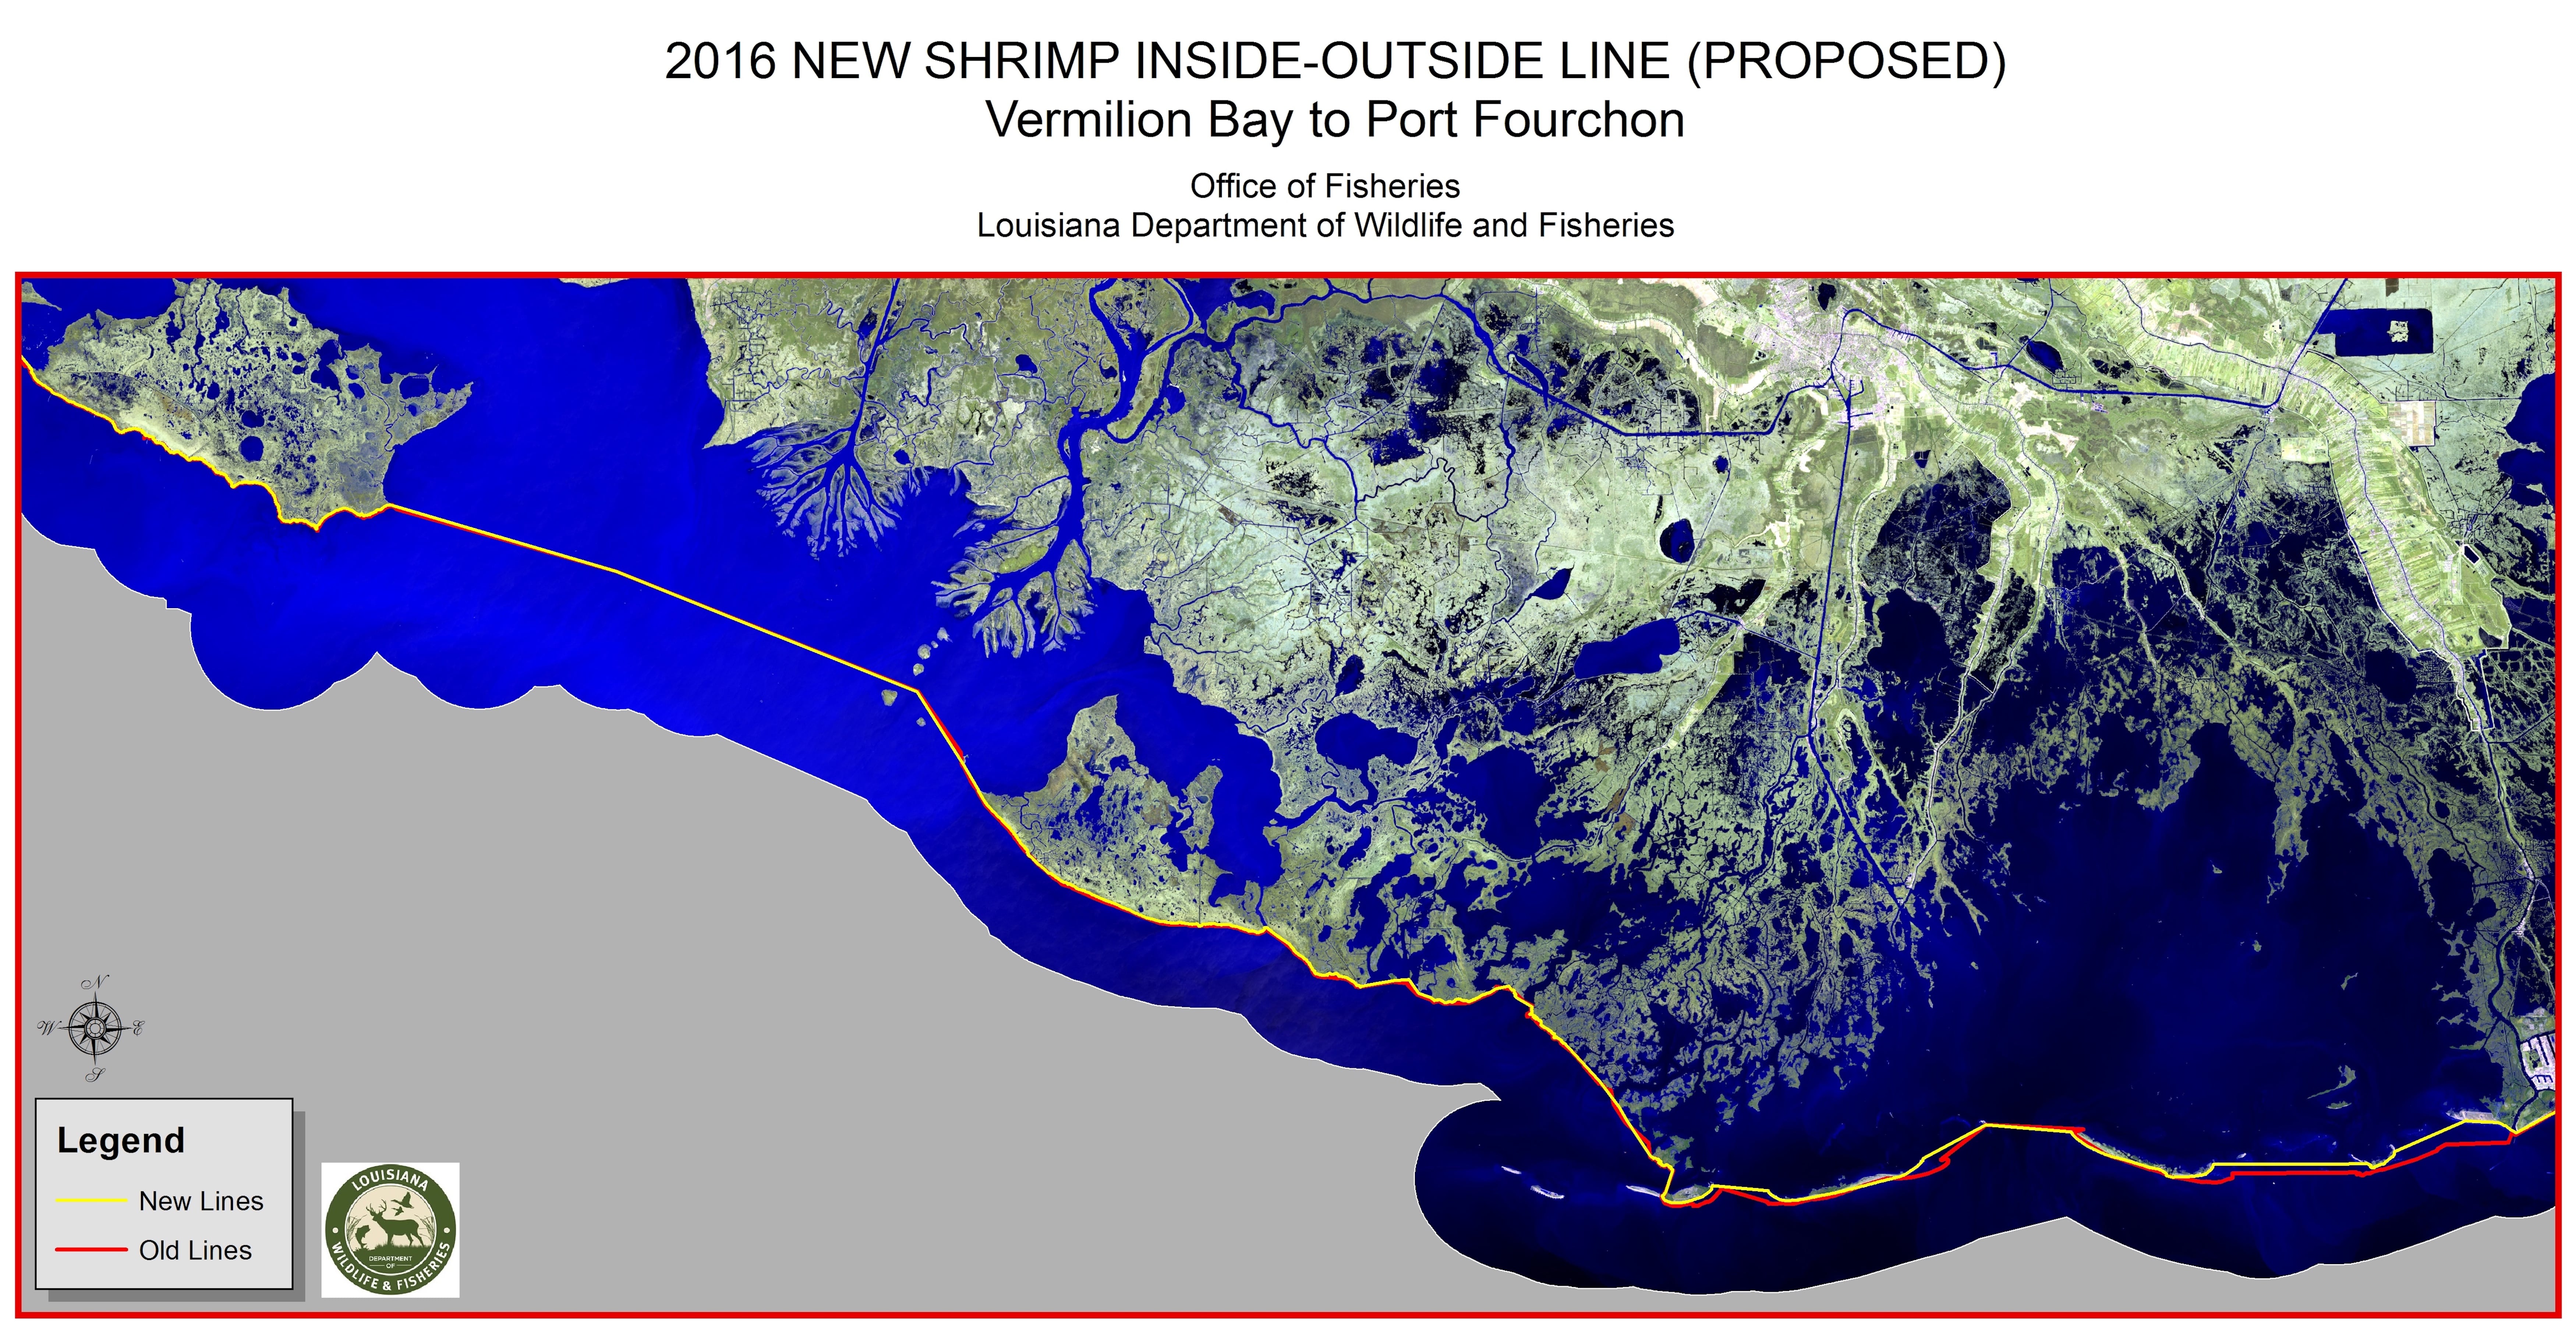 Map of the 2016 Proposed Shrimp line for Vermilion Bay to Port Fourchon